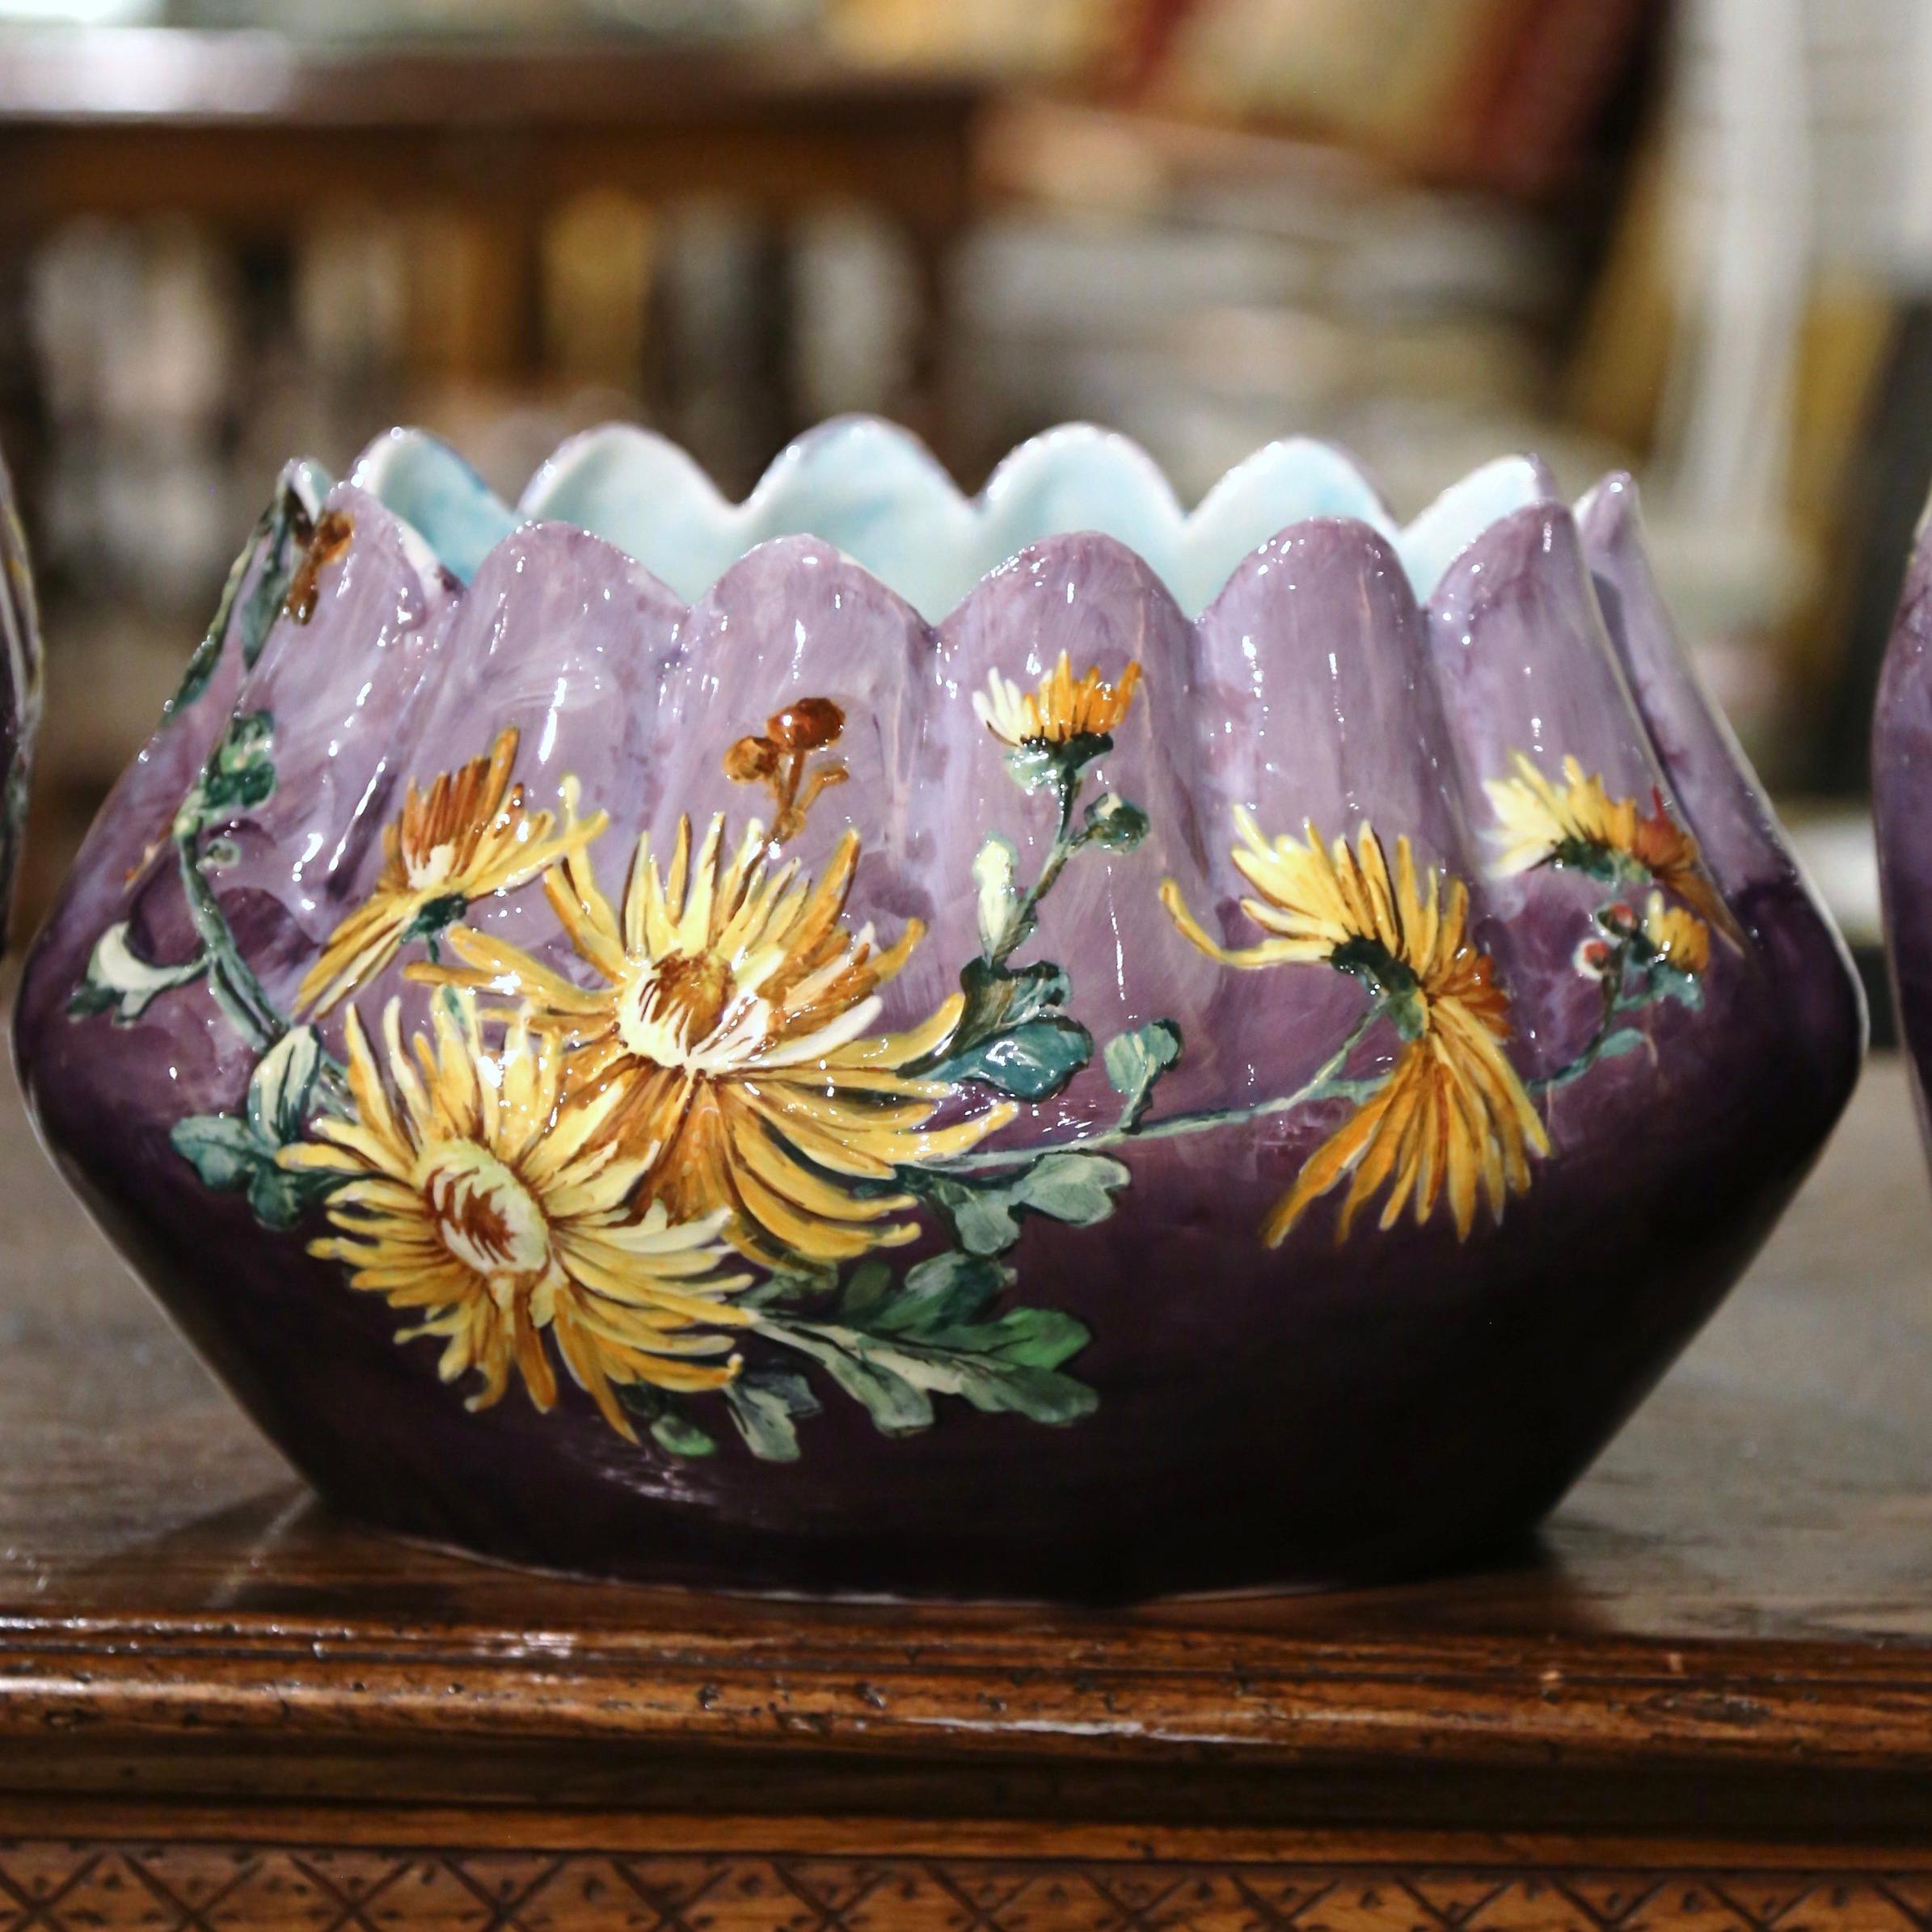 19th Century French Hand-Painted Barbotine Vases Signed P. Perret, Set of Three In Excellent Condition For Sale In Dallas, TX